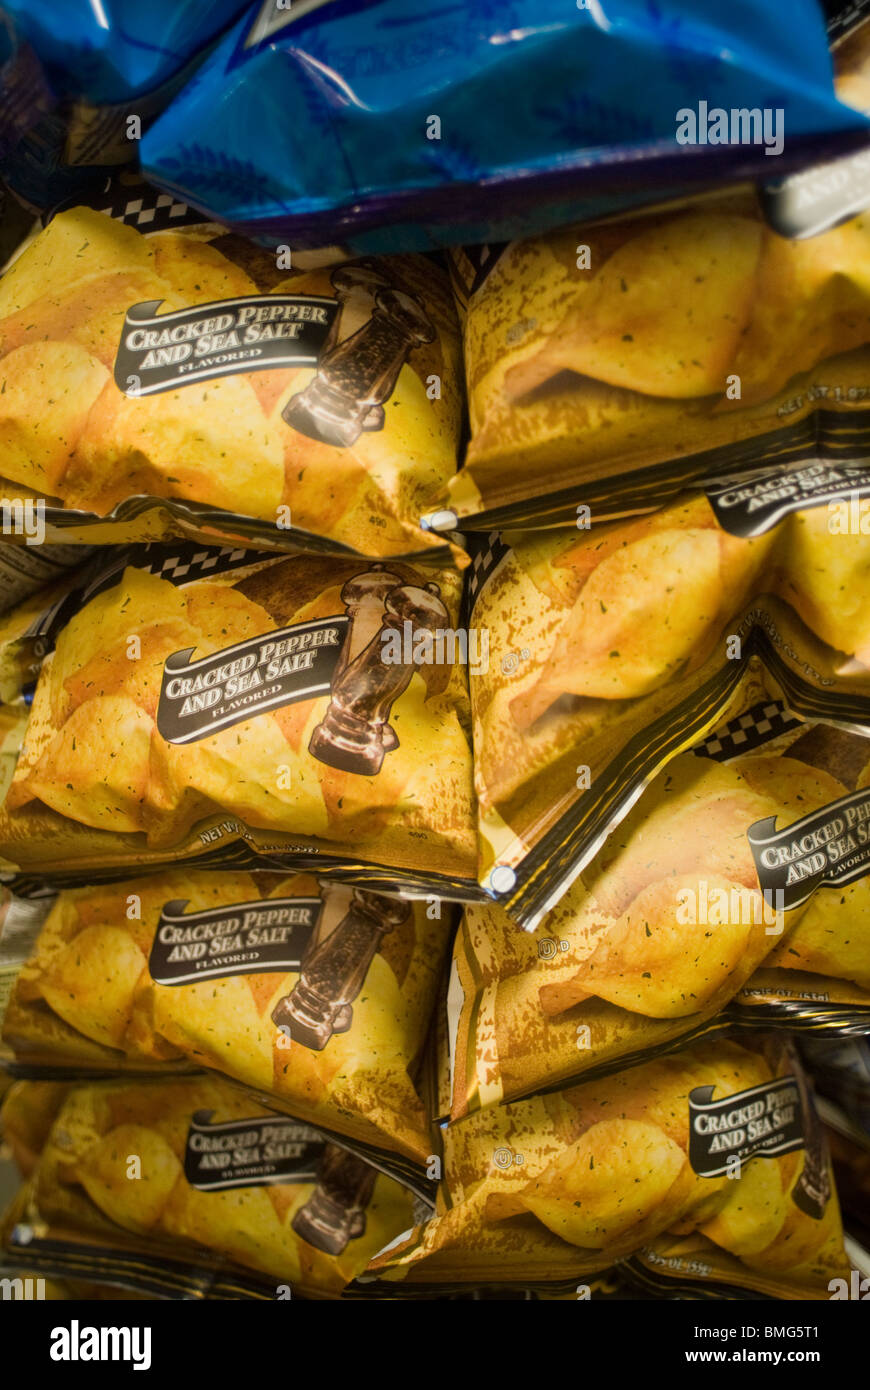 A display of tasty chips in a supermarket in New York seen on Friday, June 4, 2010. (© Richard B. Levine) Stock Photo